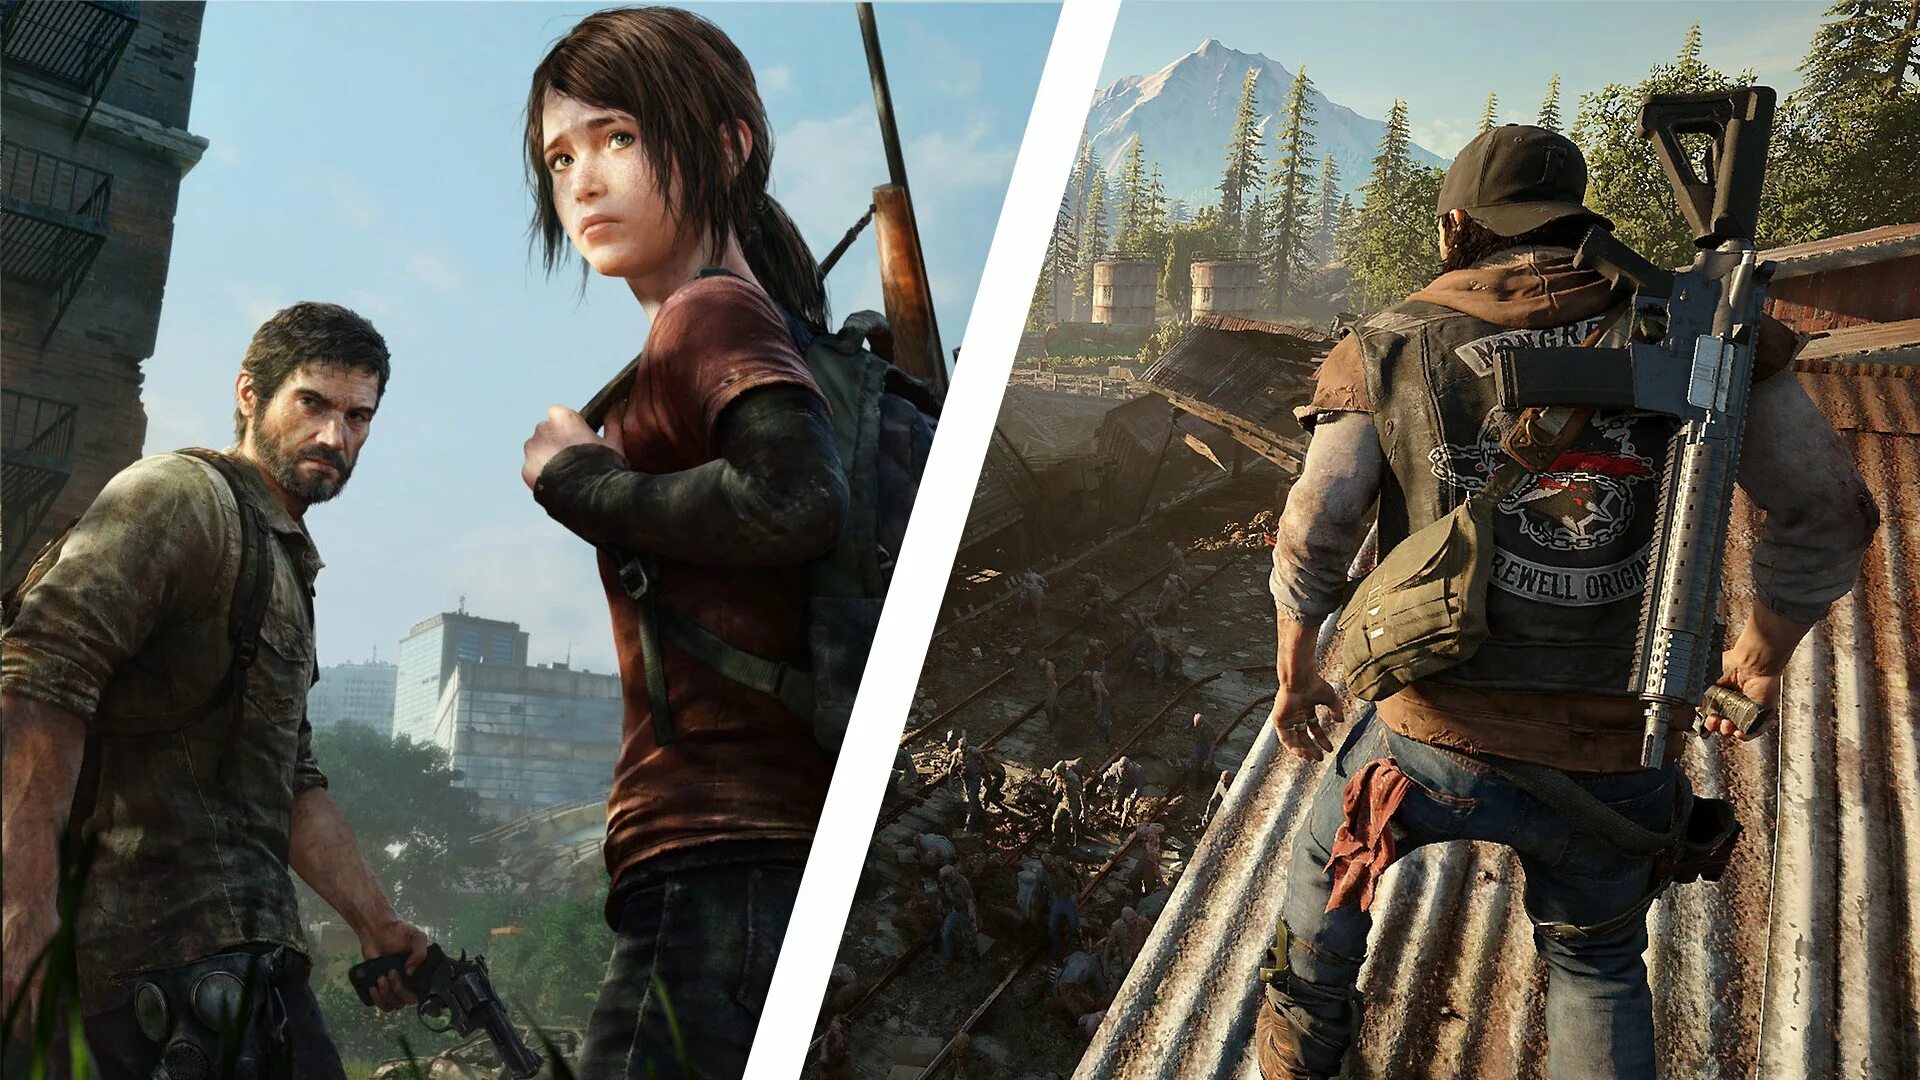 Two brothers remake ps5. The last of us Remake ps5. Days gone 2 Дата выхода. Days gone и last of us. Days gone 2 Дата выхода ps4.